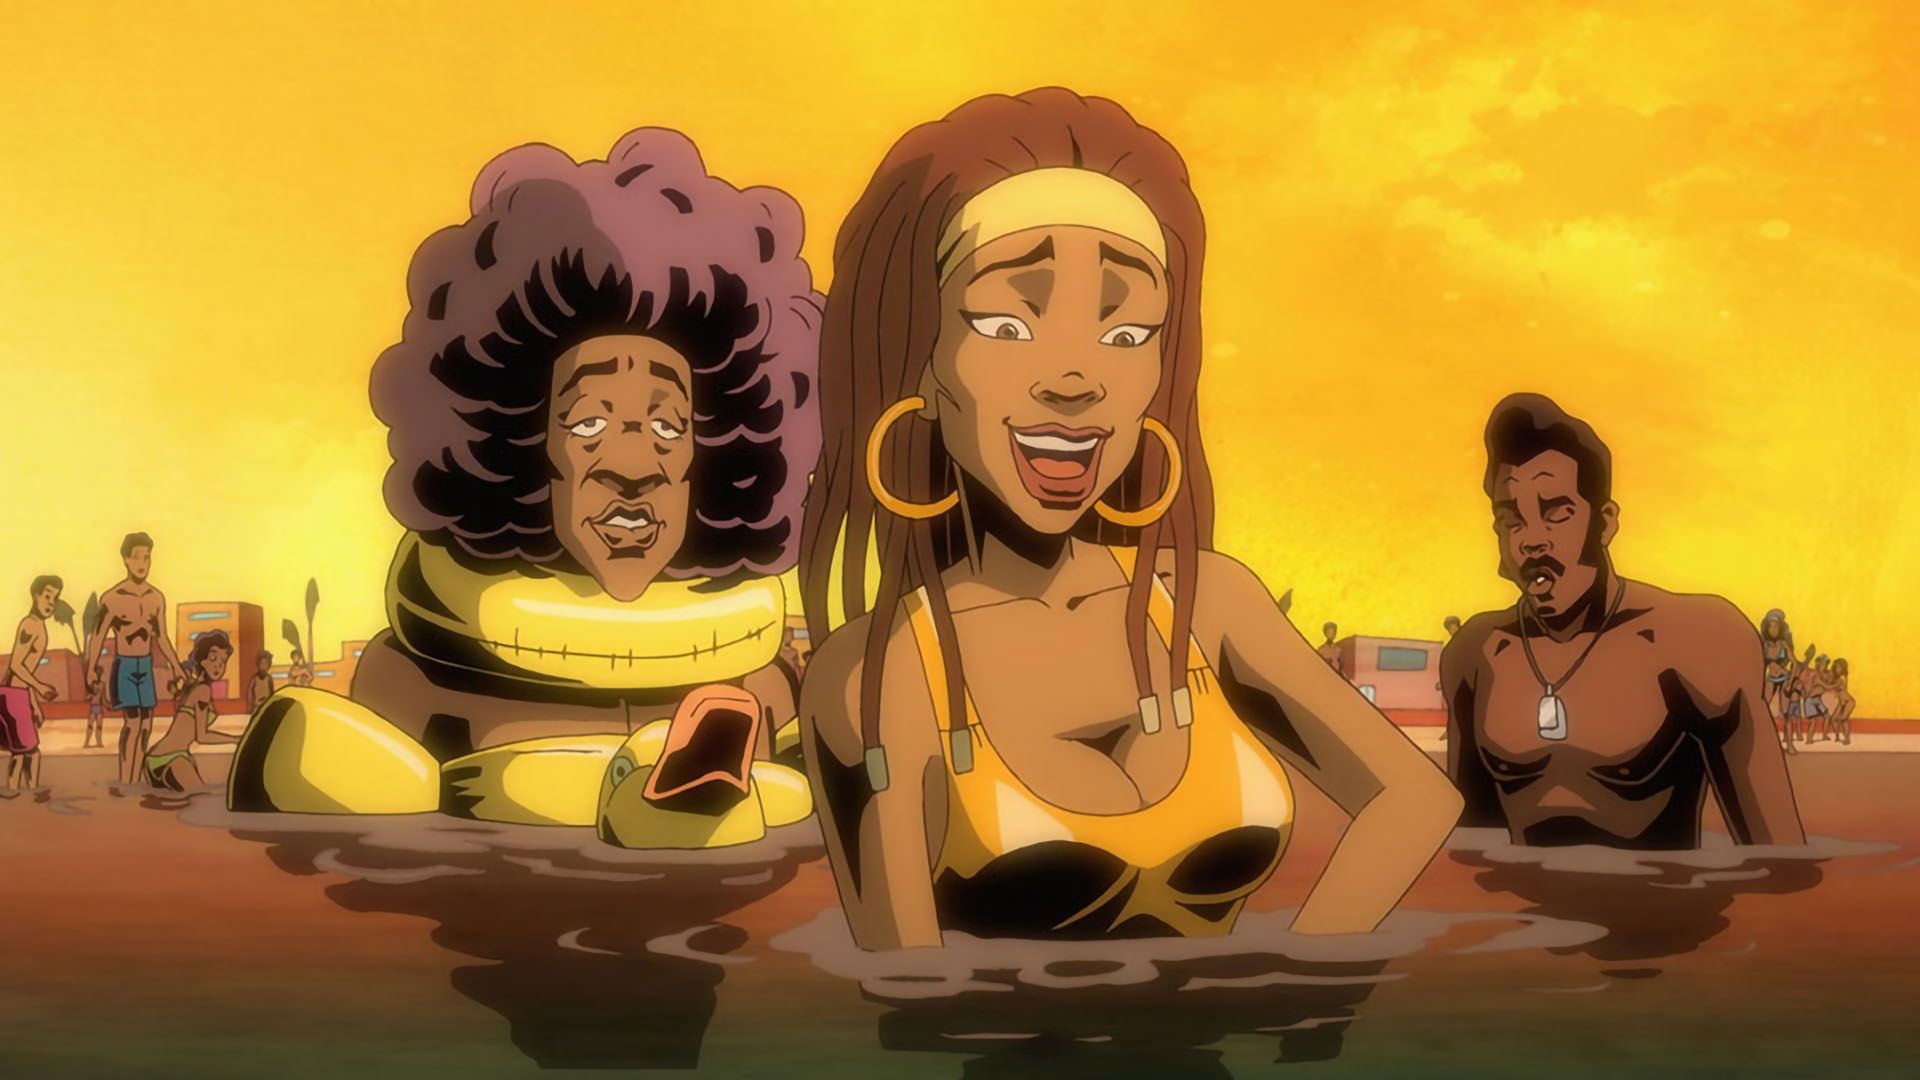 Adult Swim Anime Beach - Watch Black Dynamite Episodes and Clips for Free from Adult Swim